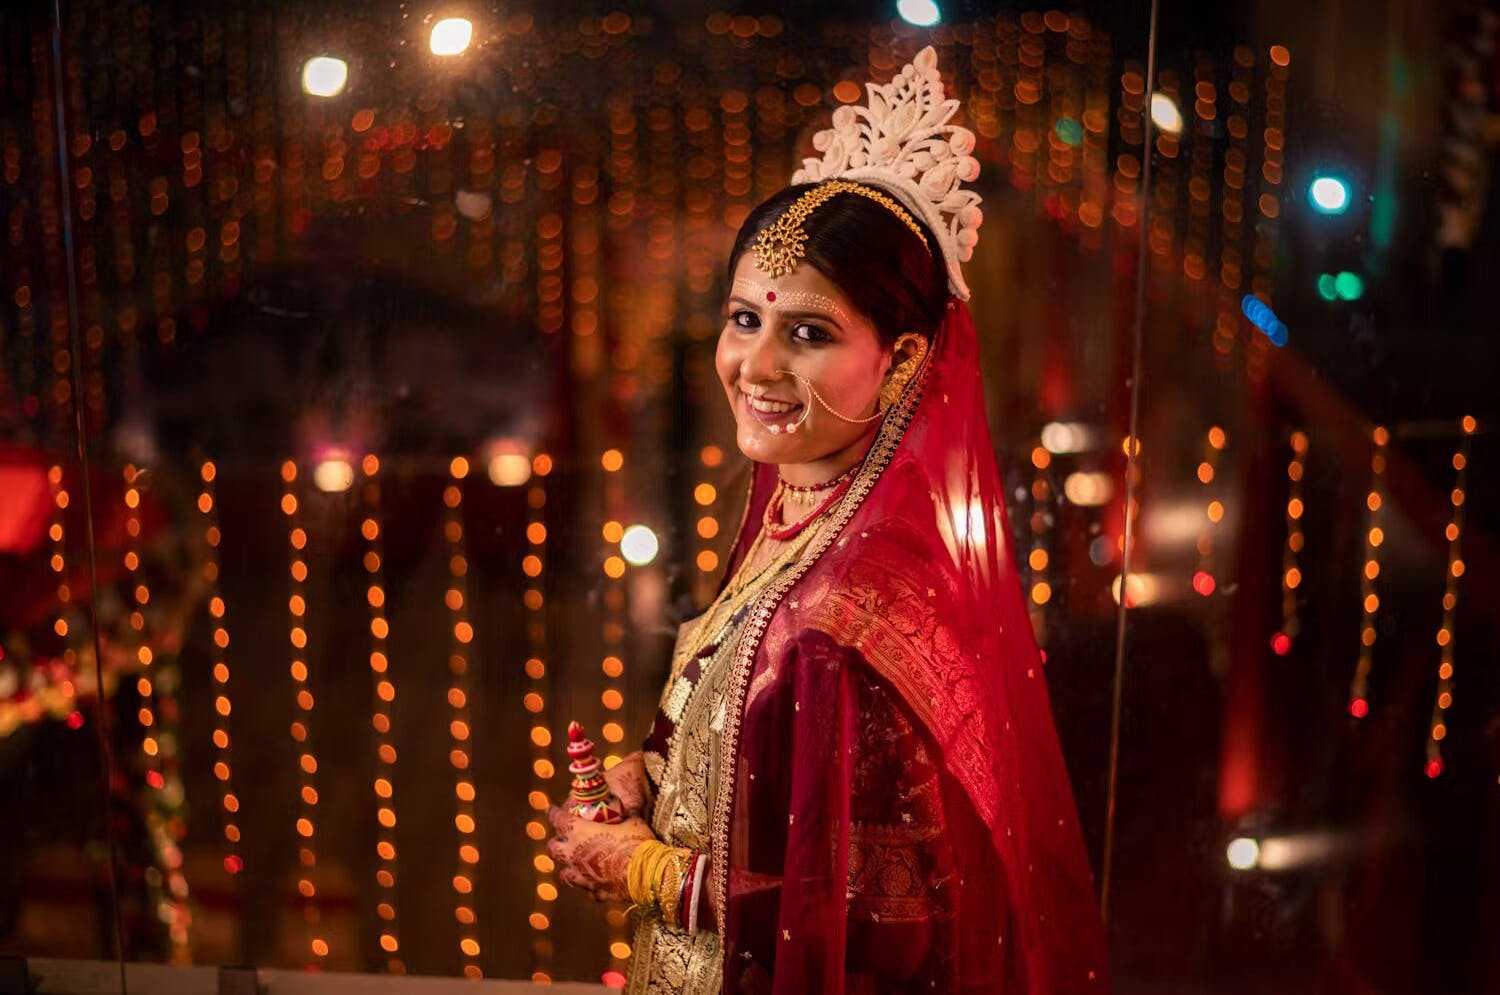 Bride With Her Sweet Turning Pose
